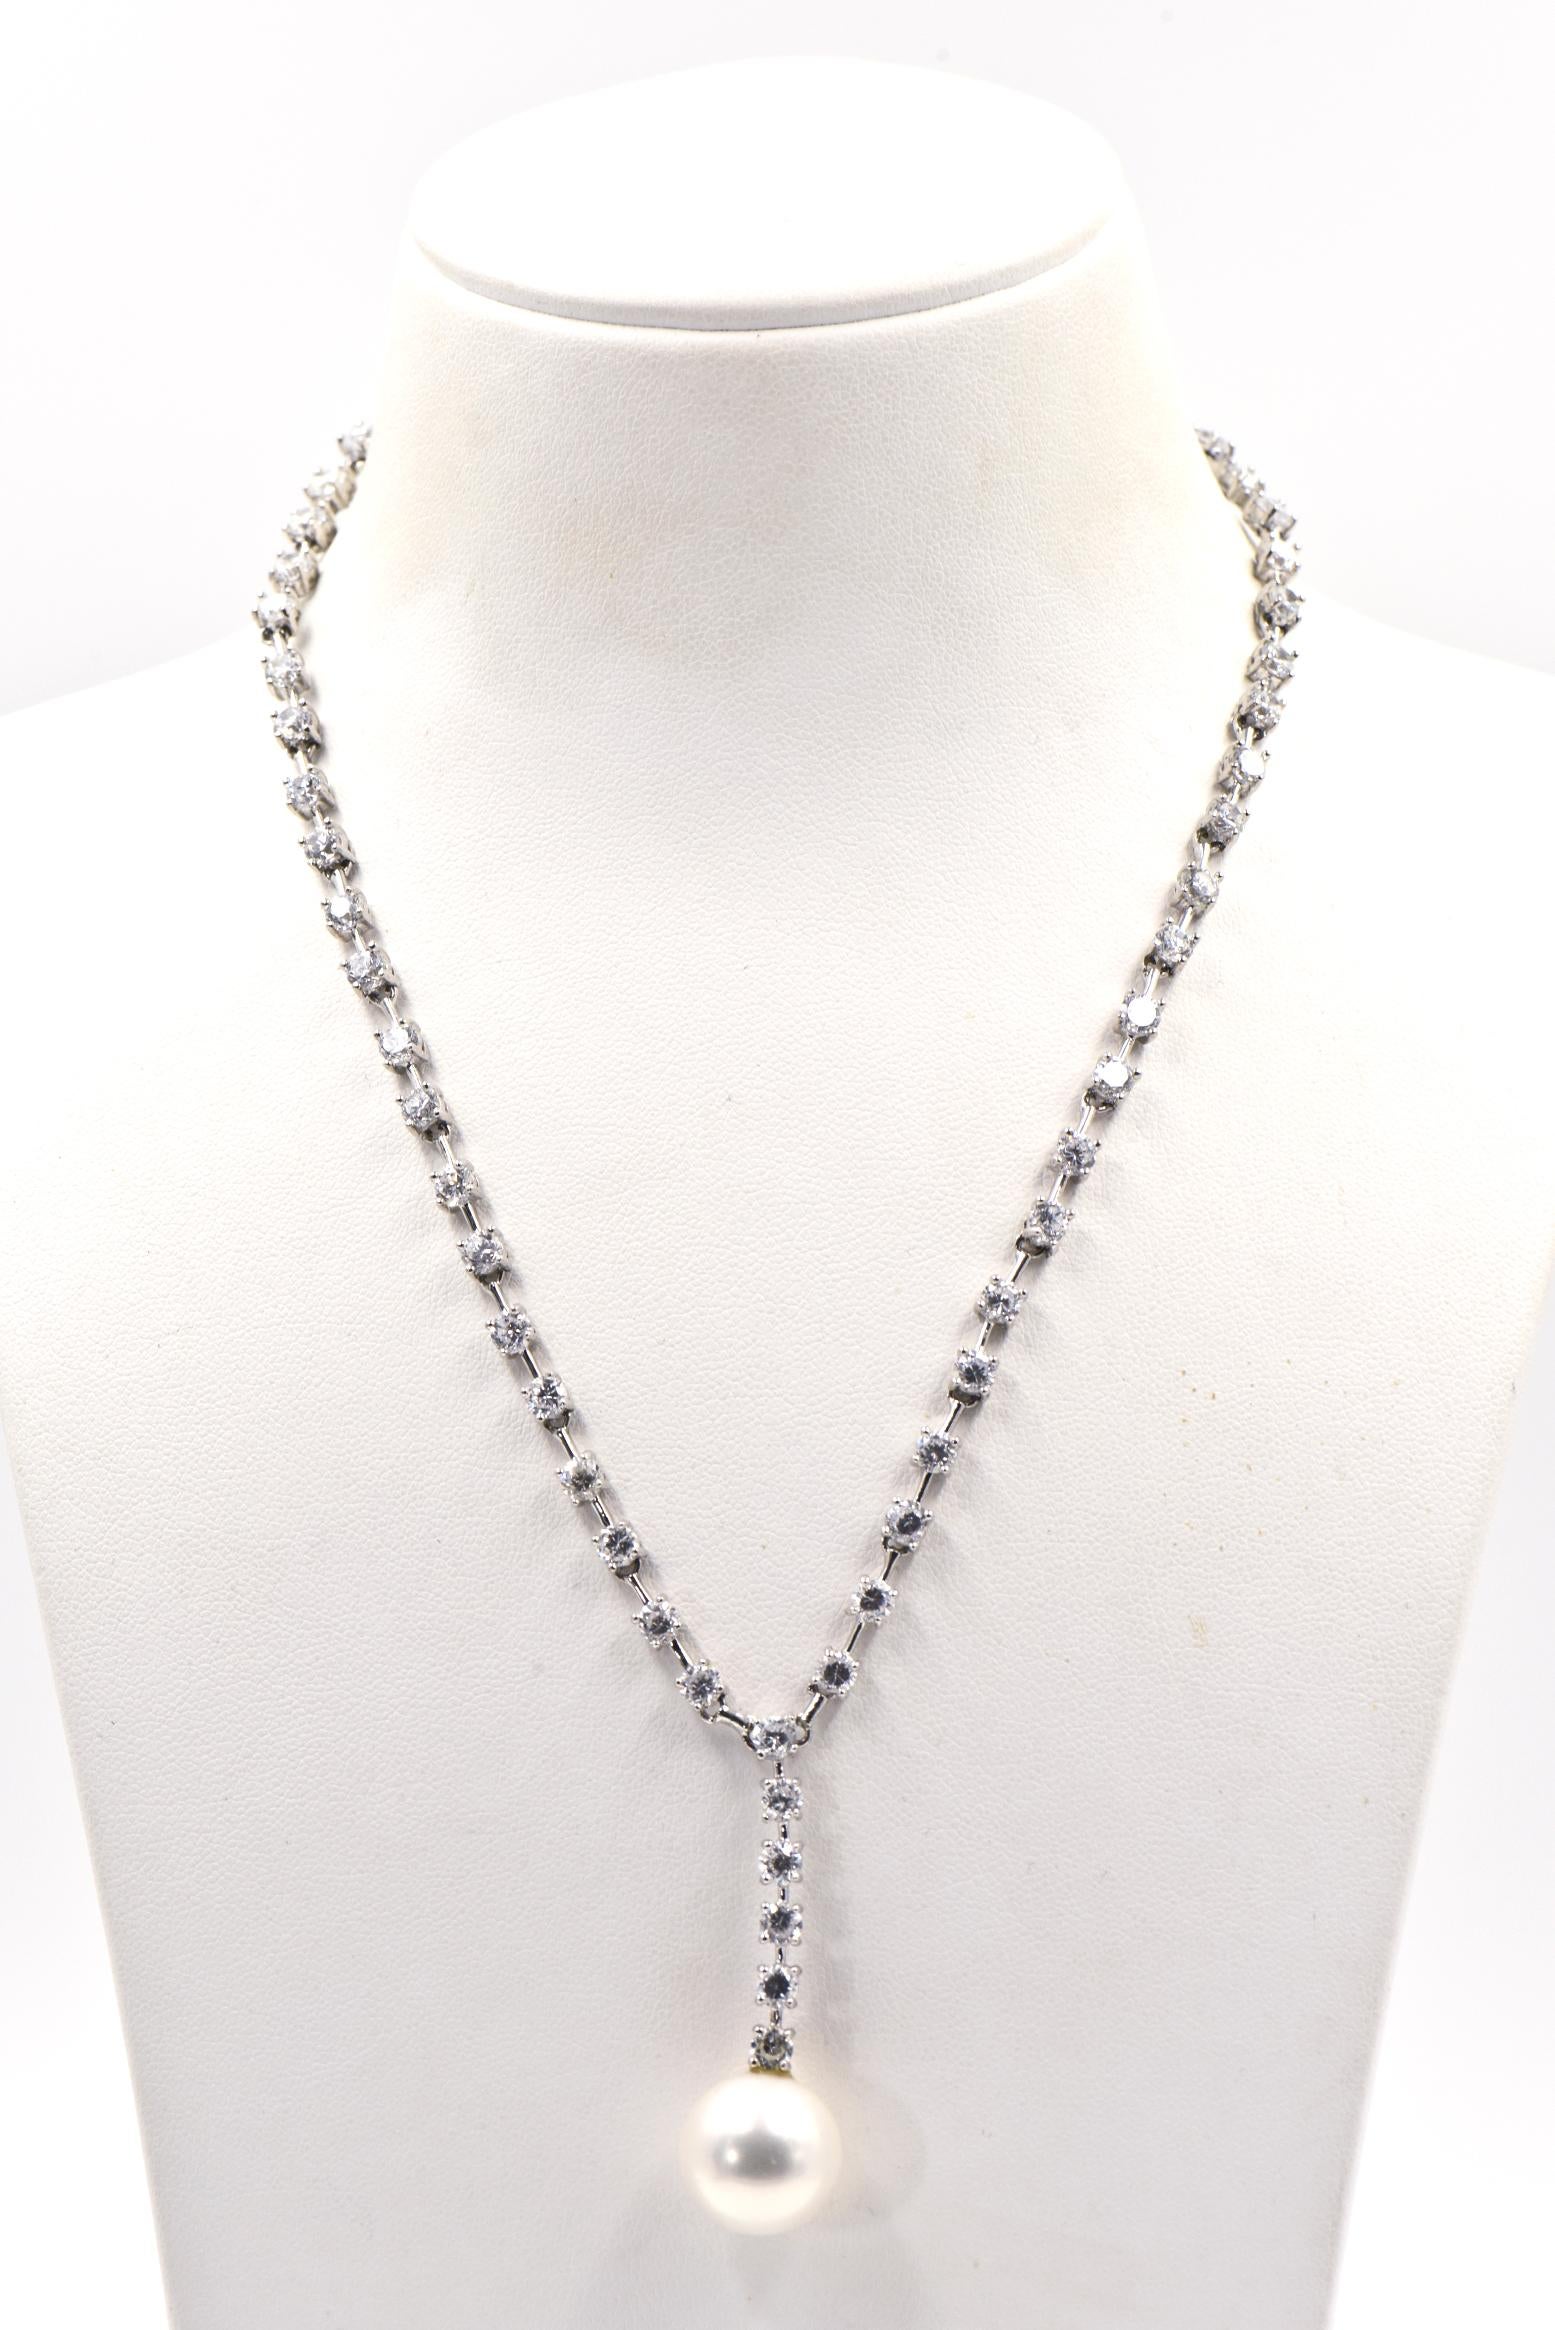 Drop Pearl and Crystal CZ Tennis Sterling Silver Statement Gala Bridal Necklace 2